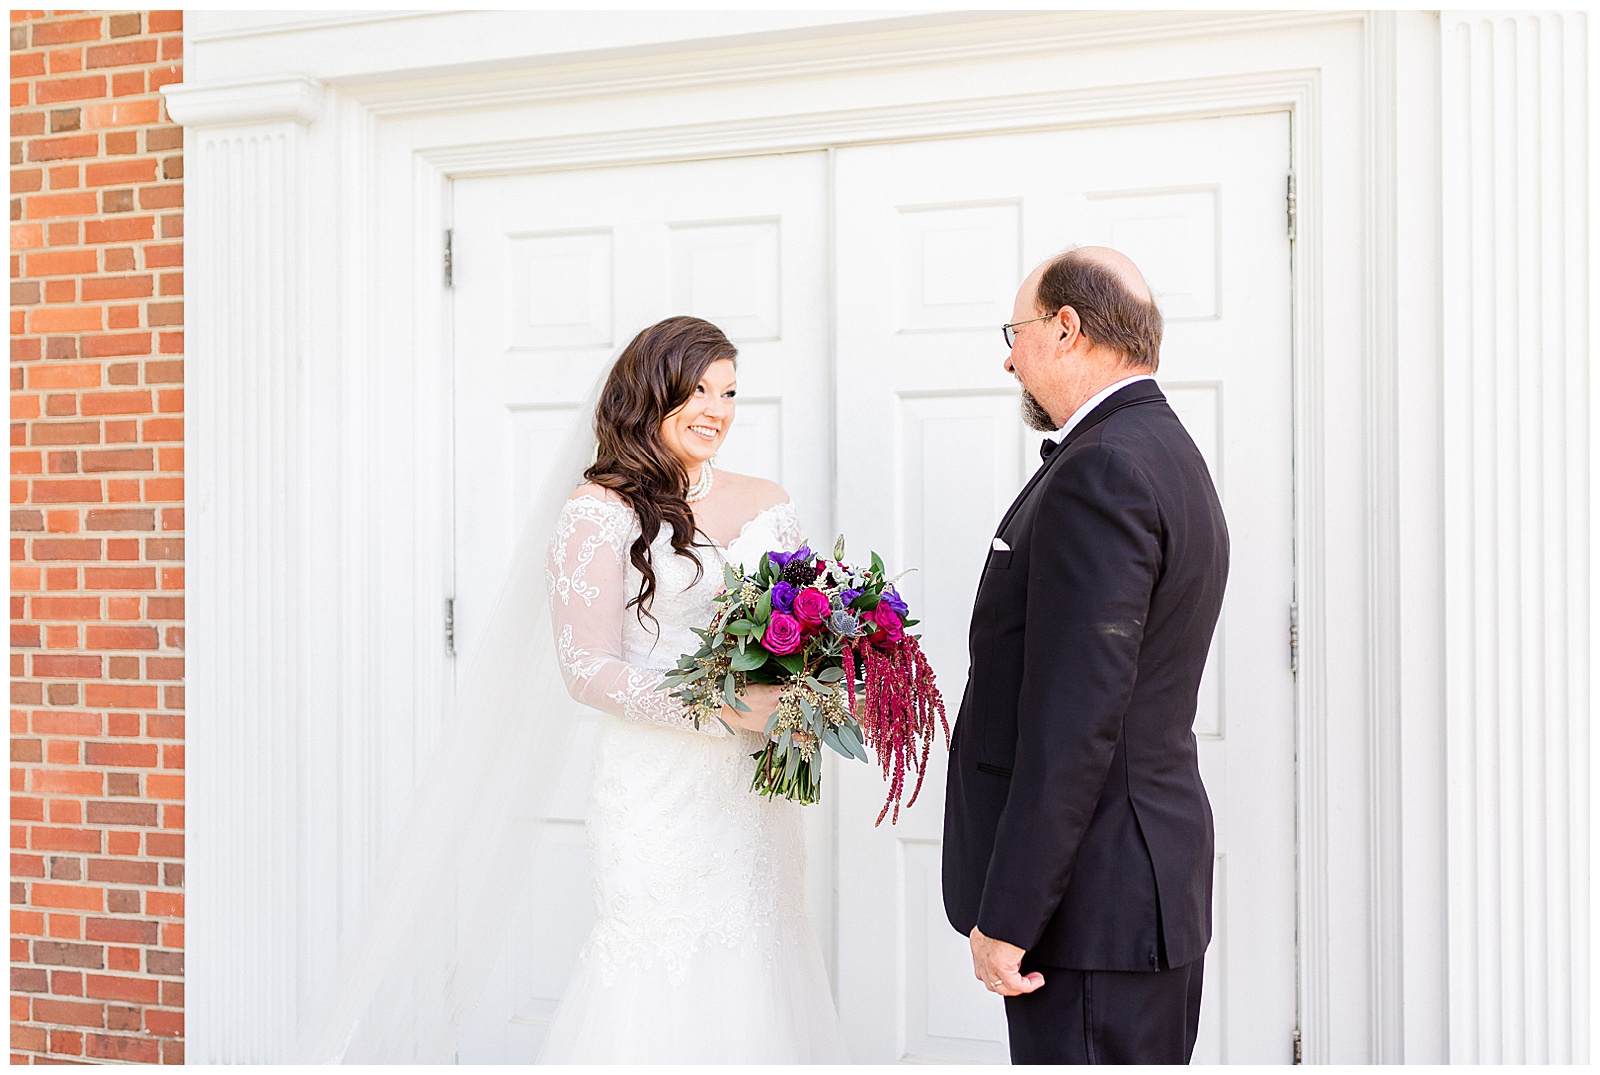 💍 emotional first look dad father of bride outdoor 👰 Bride: lace wedding dress with rhinestone belt rhinestone barrette in hair down with pearls 💍 Bright Colorful Summer City Wedding in Charlotte, NC with Taryn and Ryan | Kevyn Dixon Photography